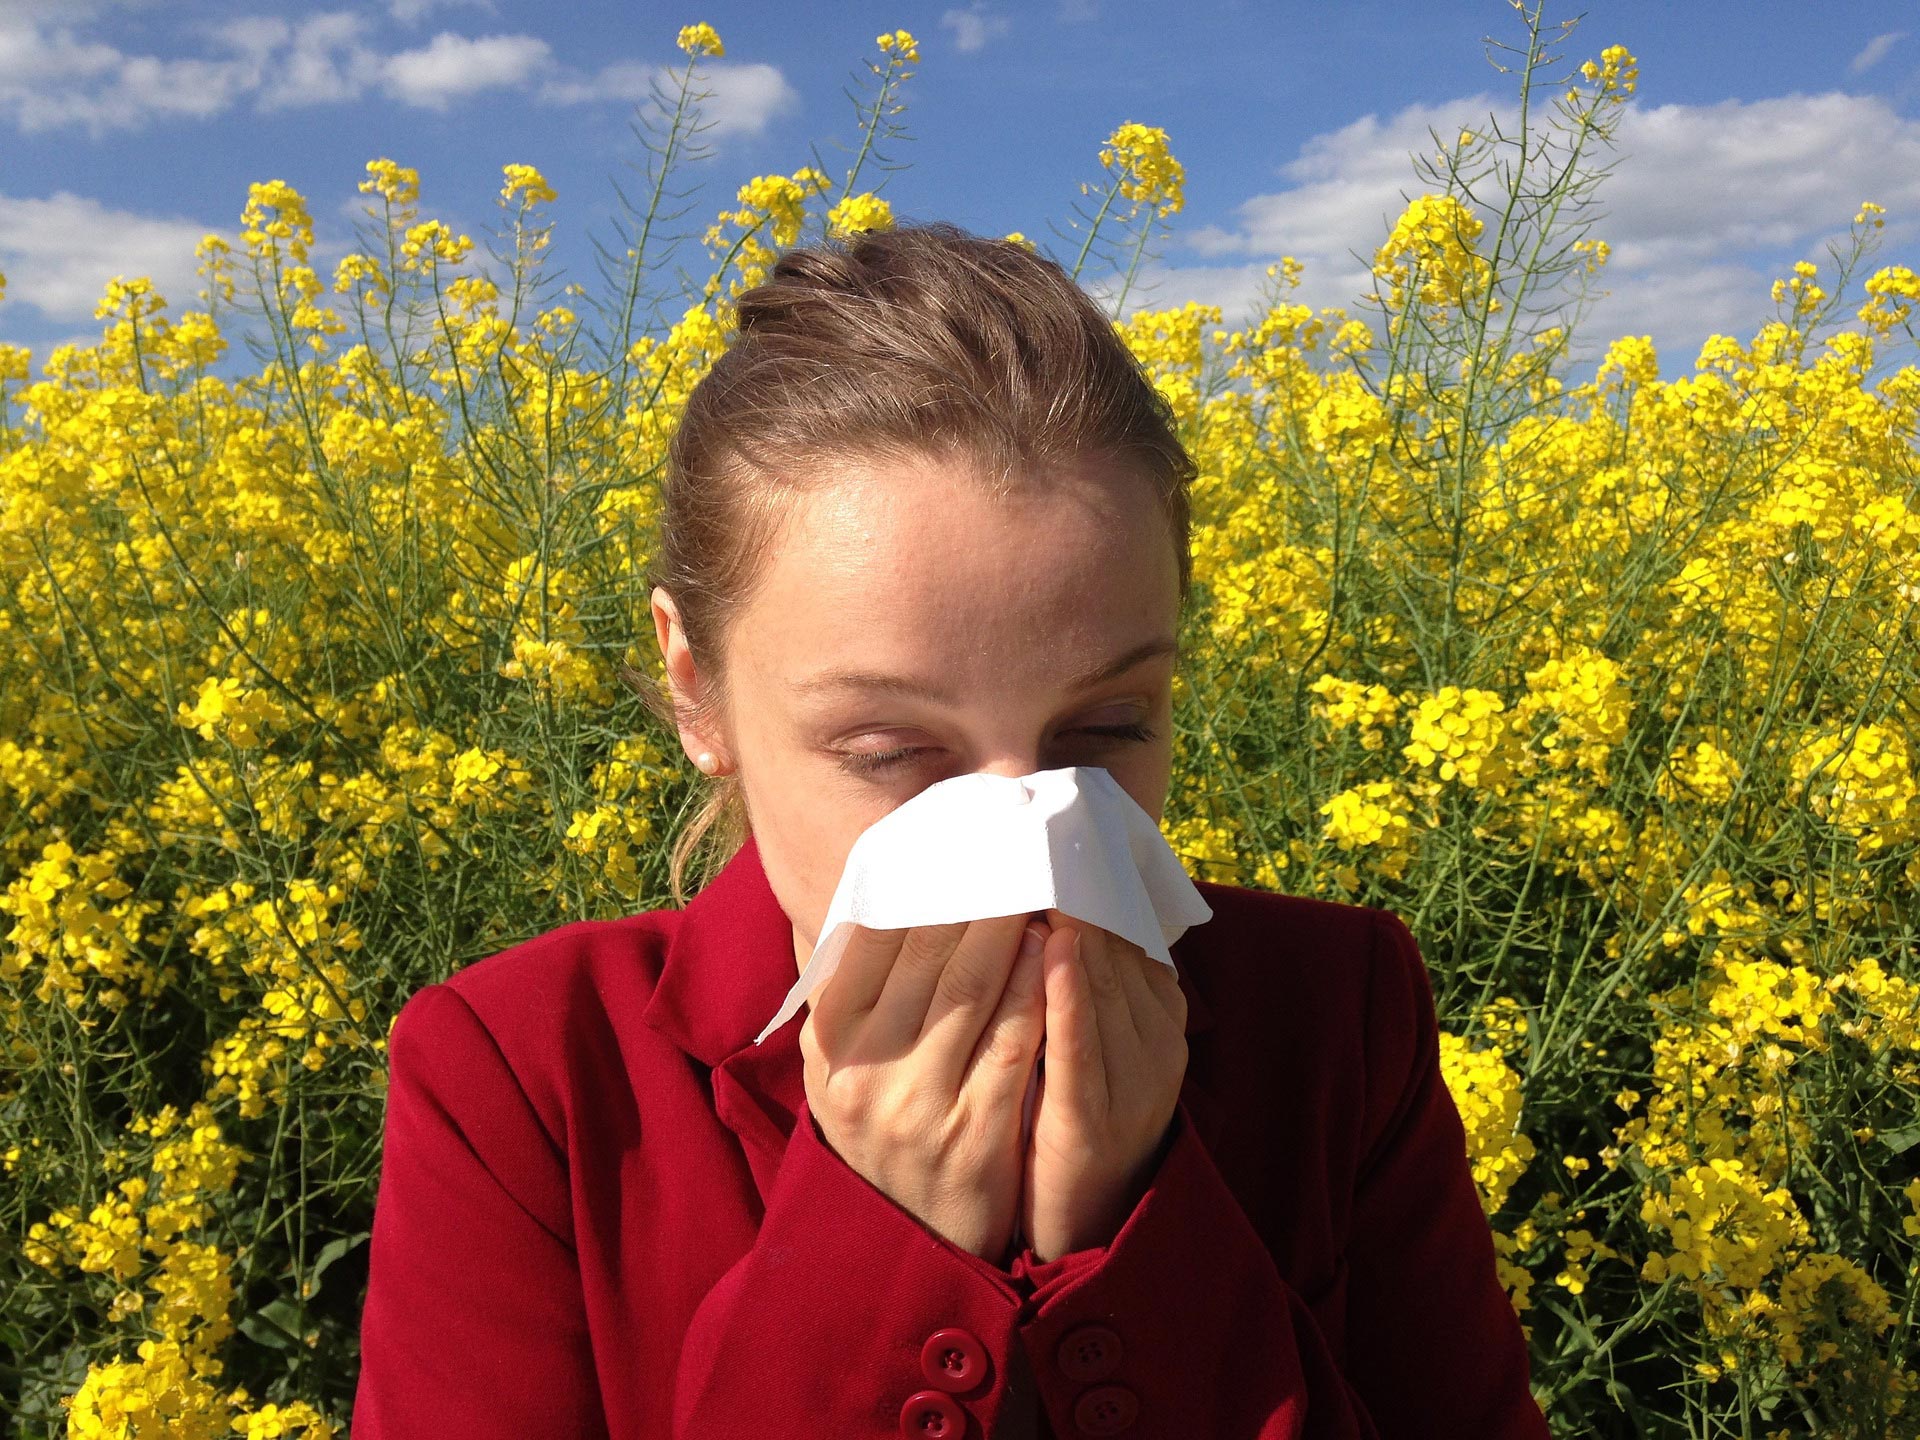 The 'hay fever’ season is nearly with us!